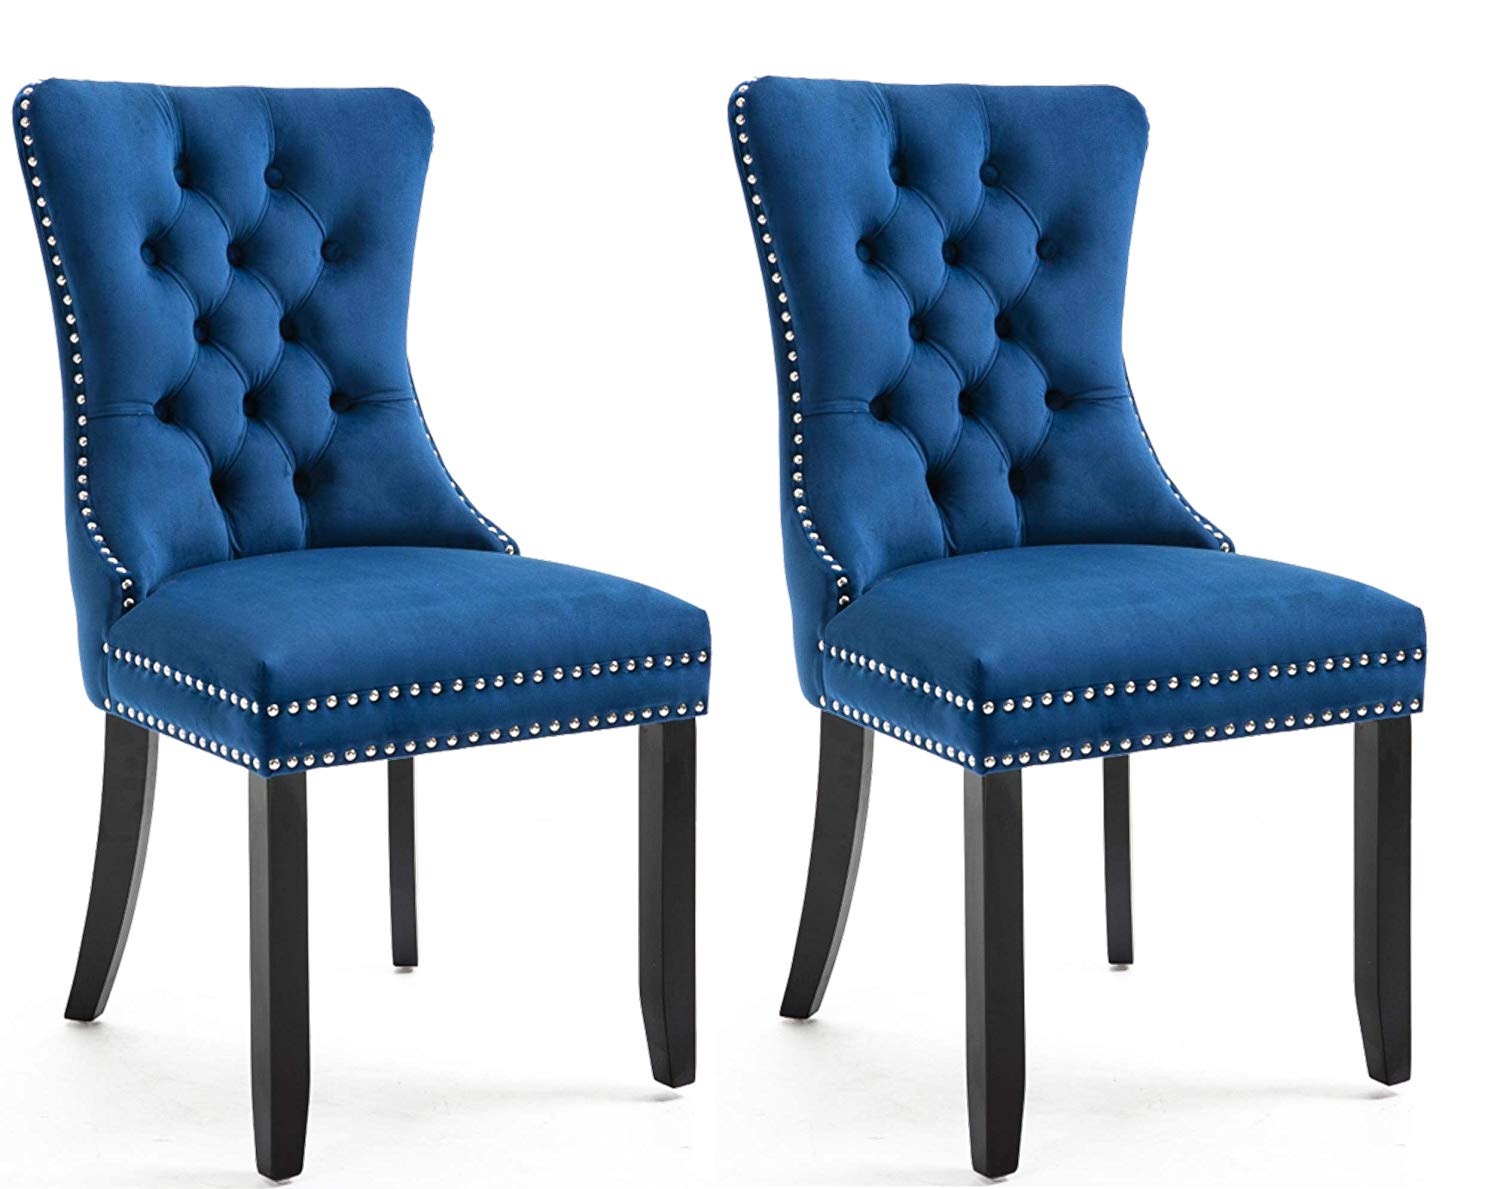 Navy Blue Tufted Dining Room Chairs